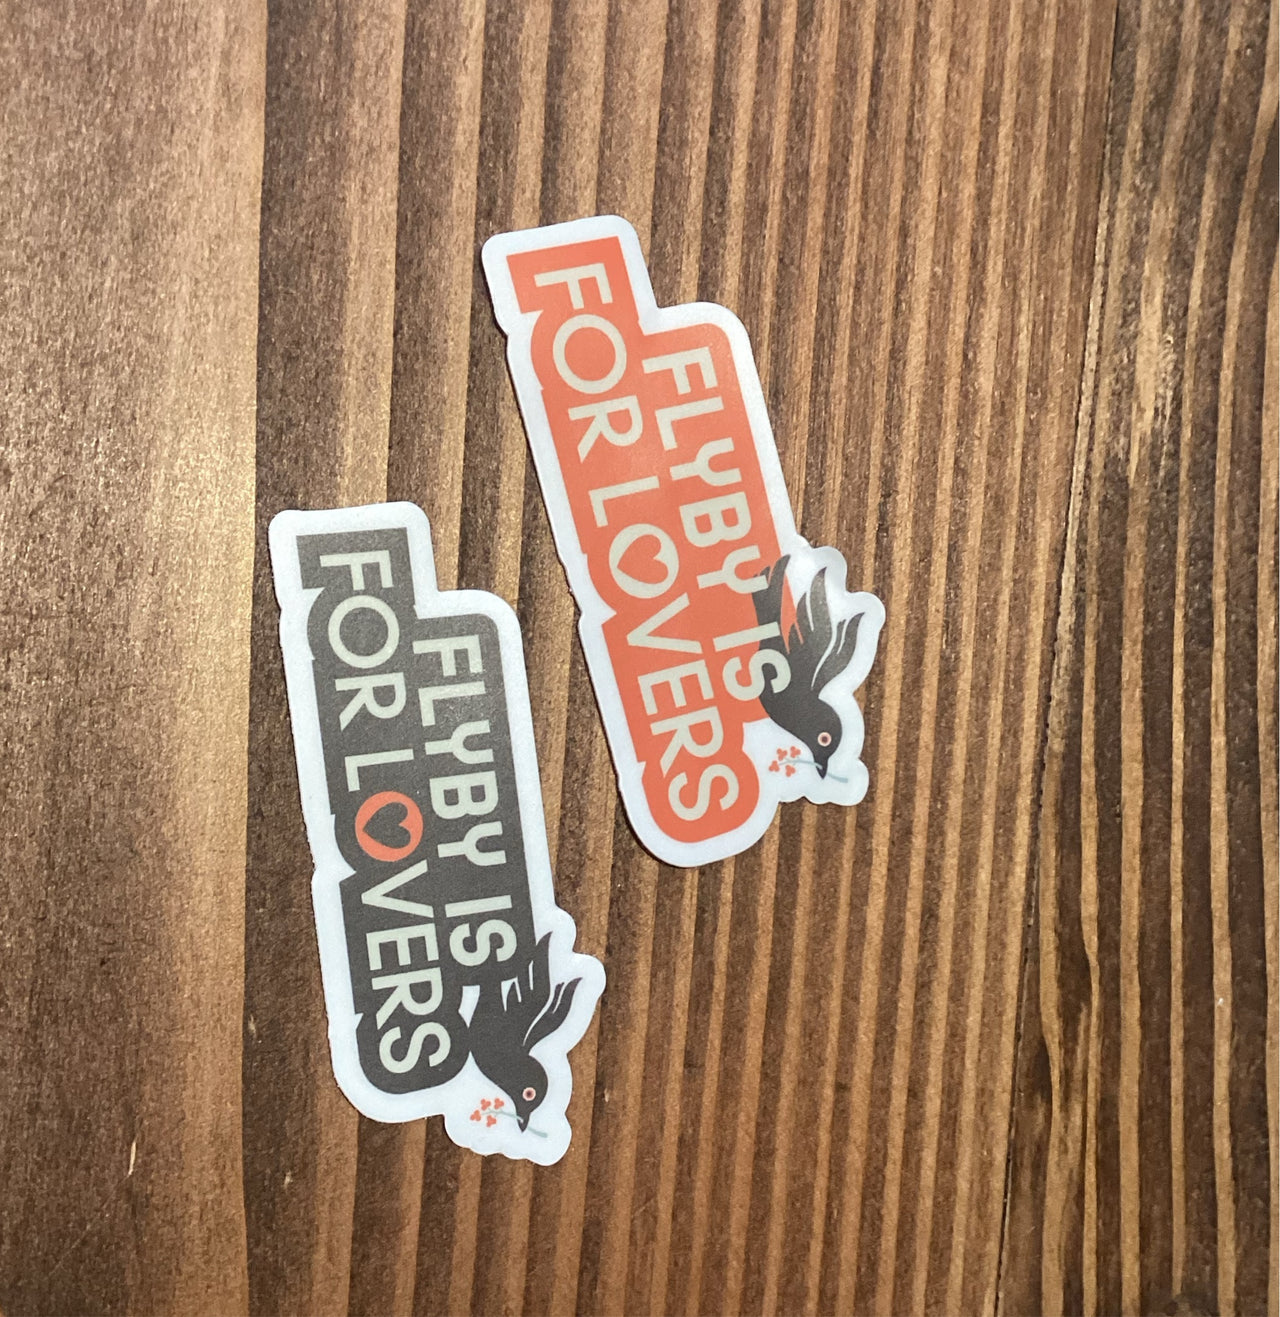 Flyby - Flyby Is for Lovers Sticker (Small)